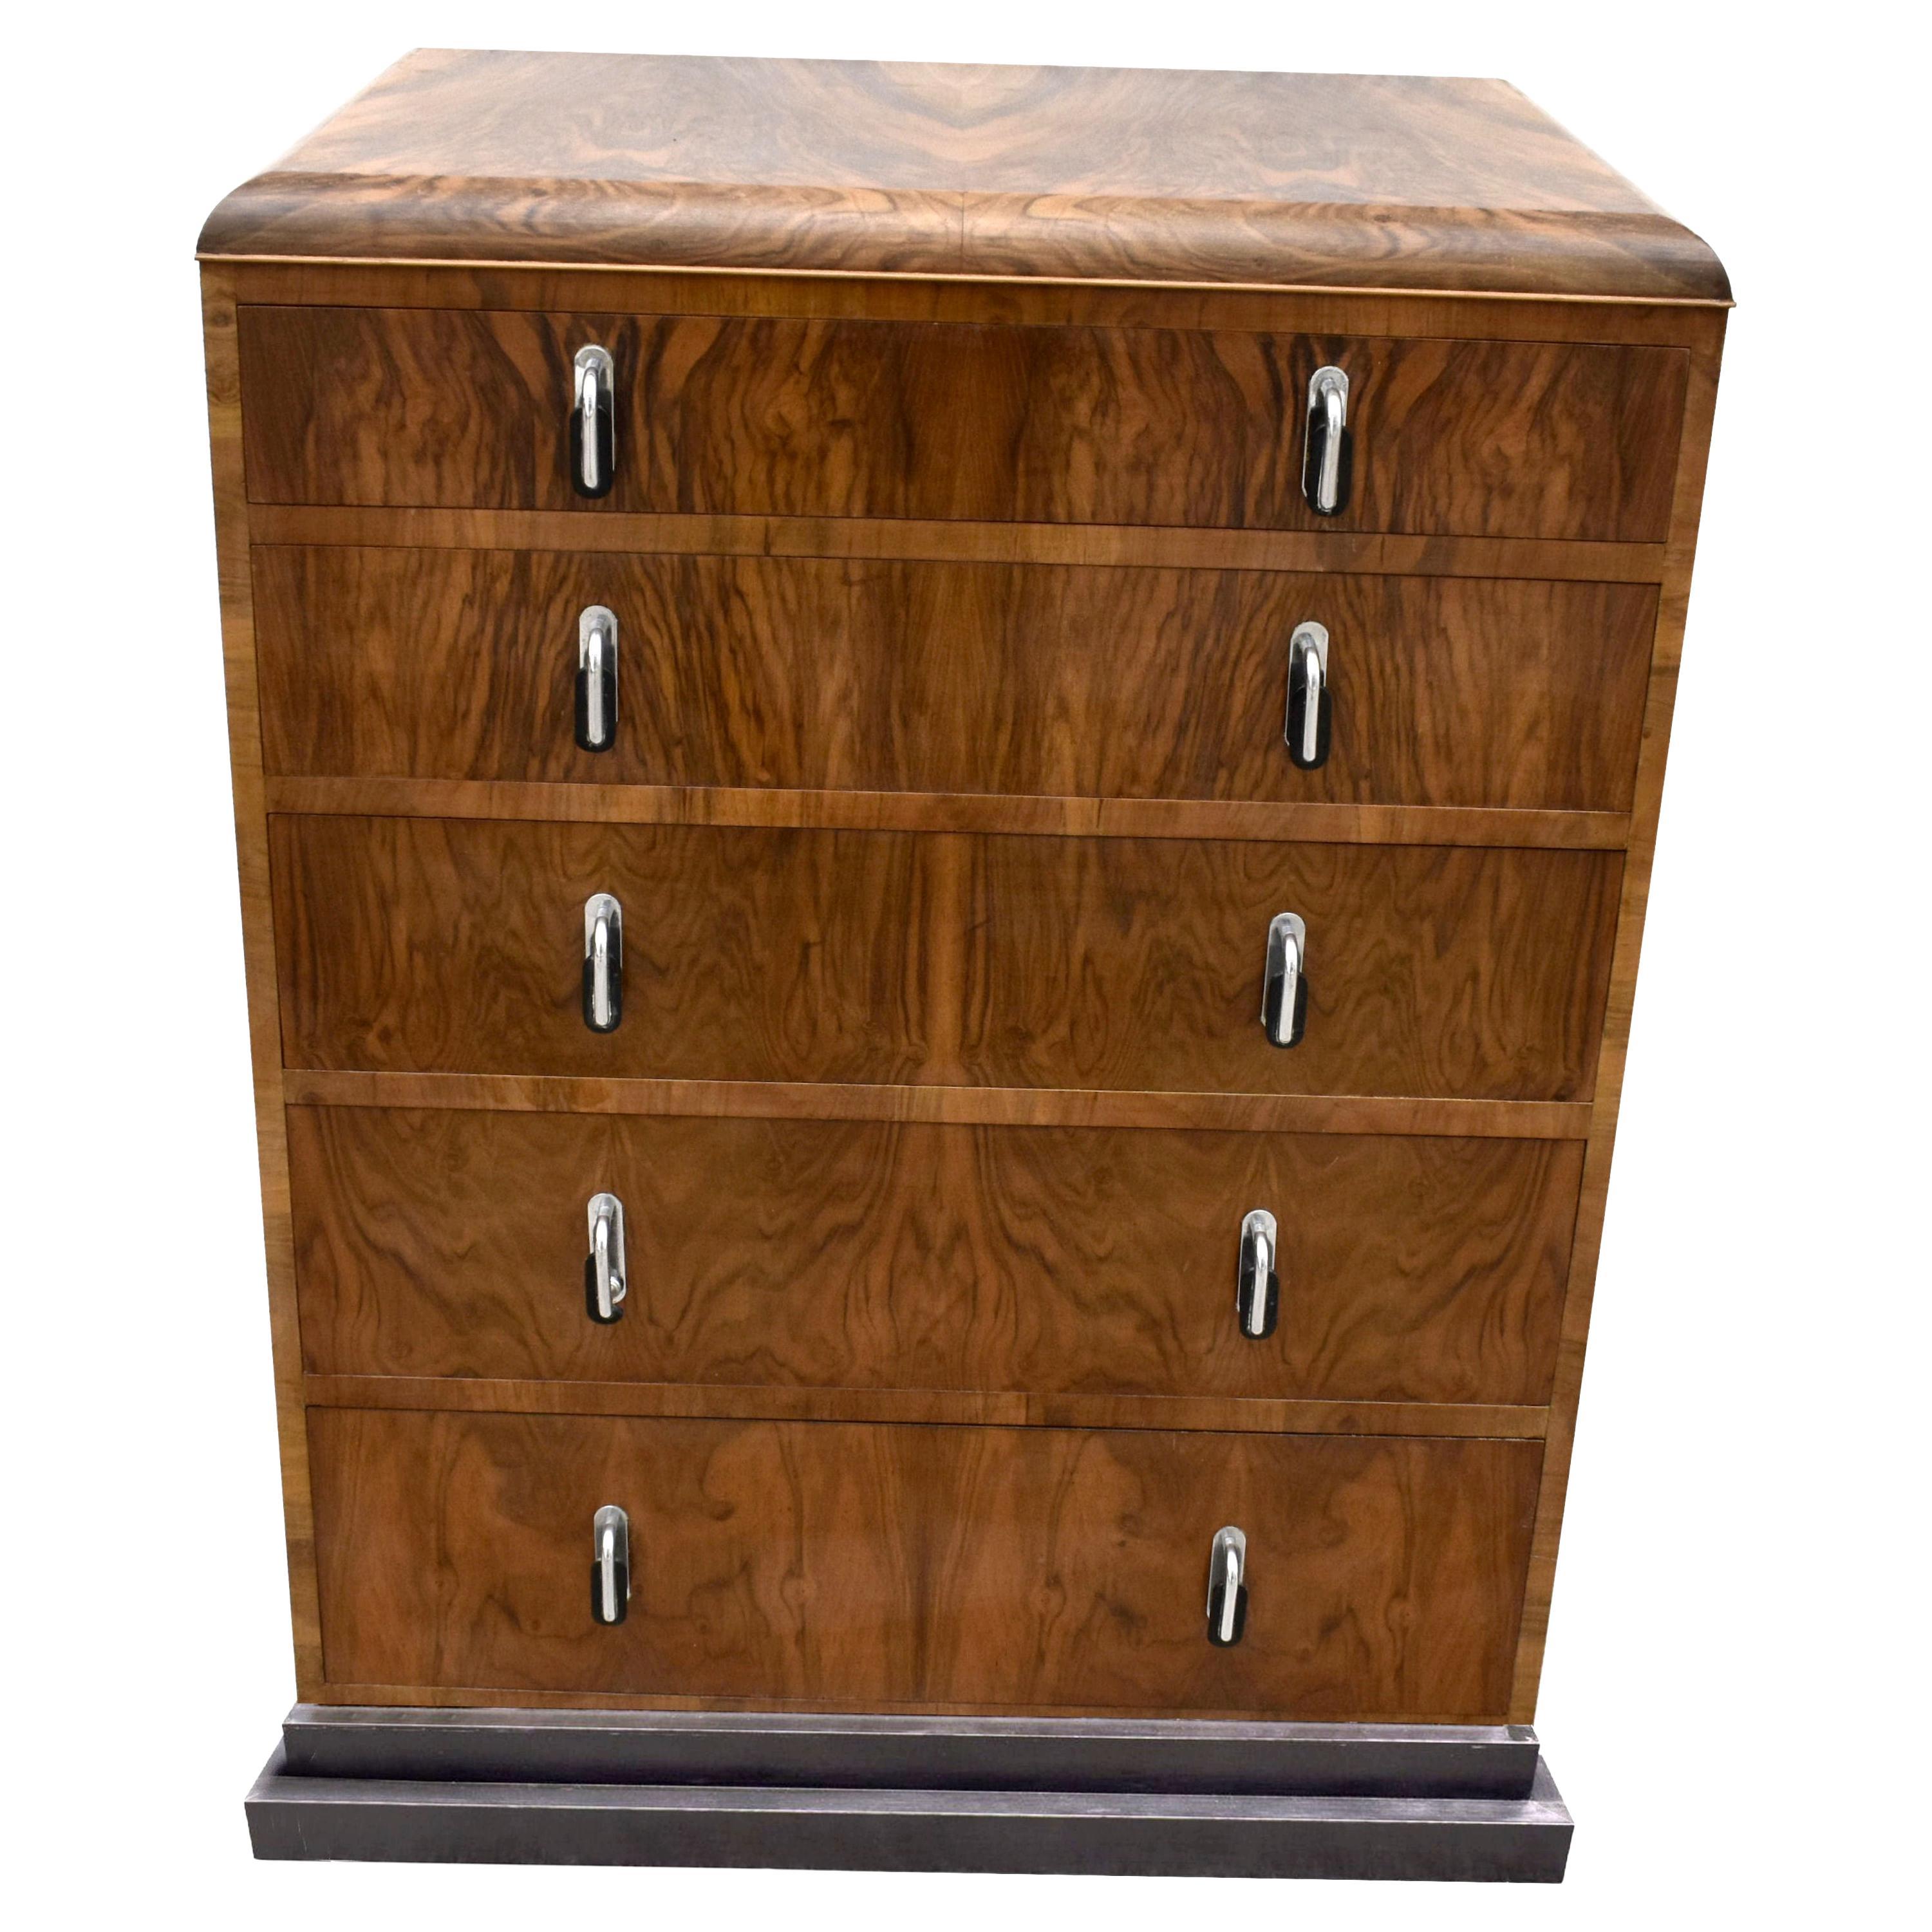 Very stylish Art Deco walnut chest of drawers originating from England and dating to the 1930's. It has stunning walnut veneers and great original Art Deco handles in chrome and black bakelite. Great stepped design to the stepped ebonized plinth